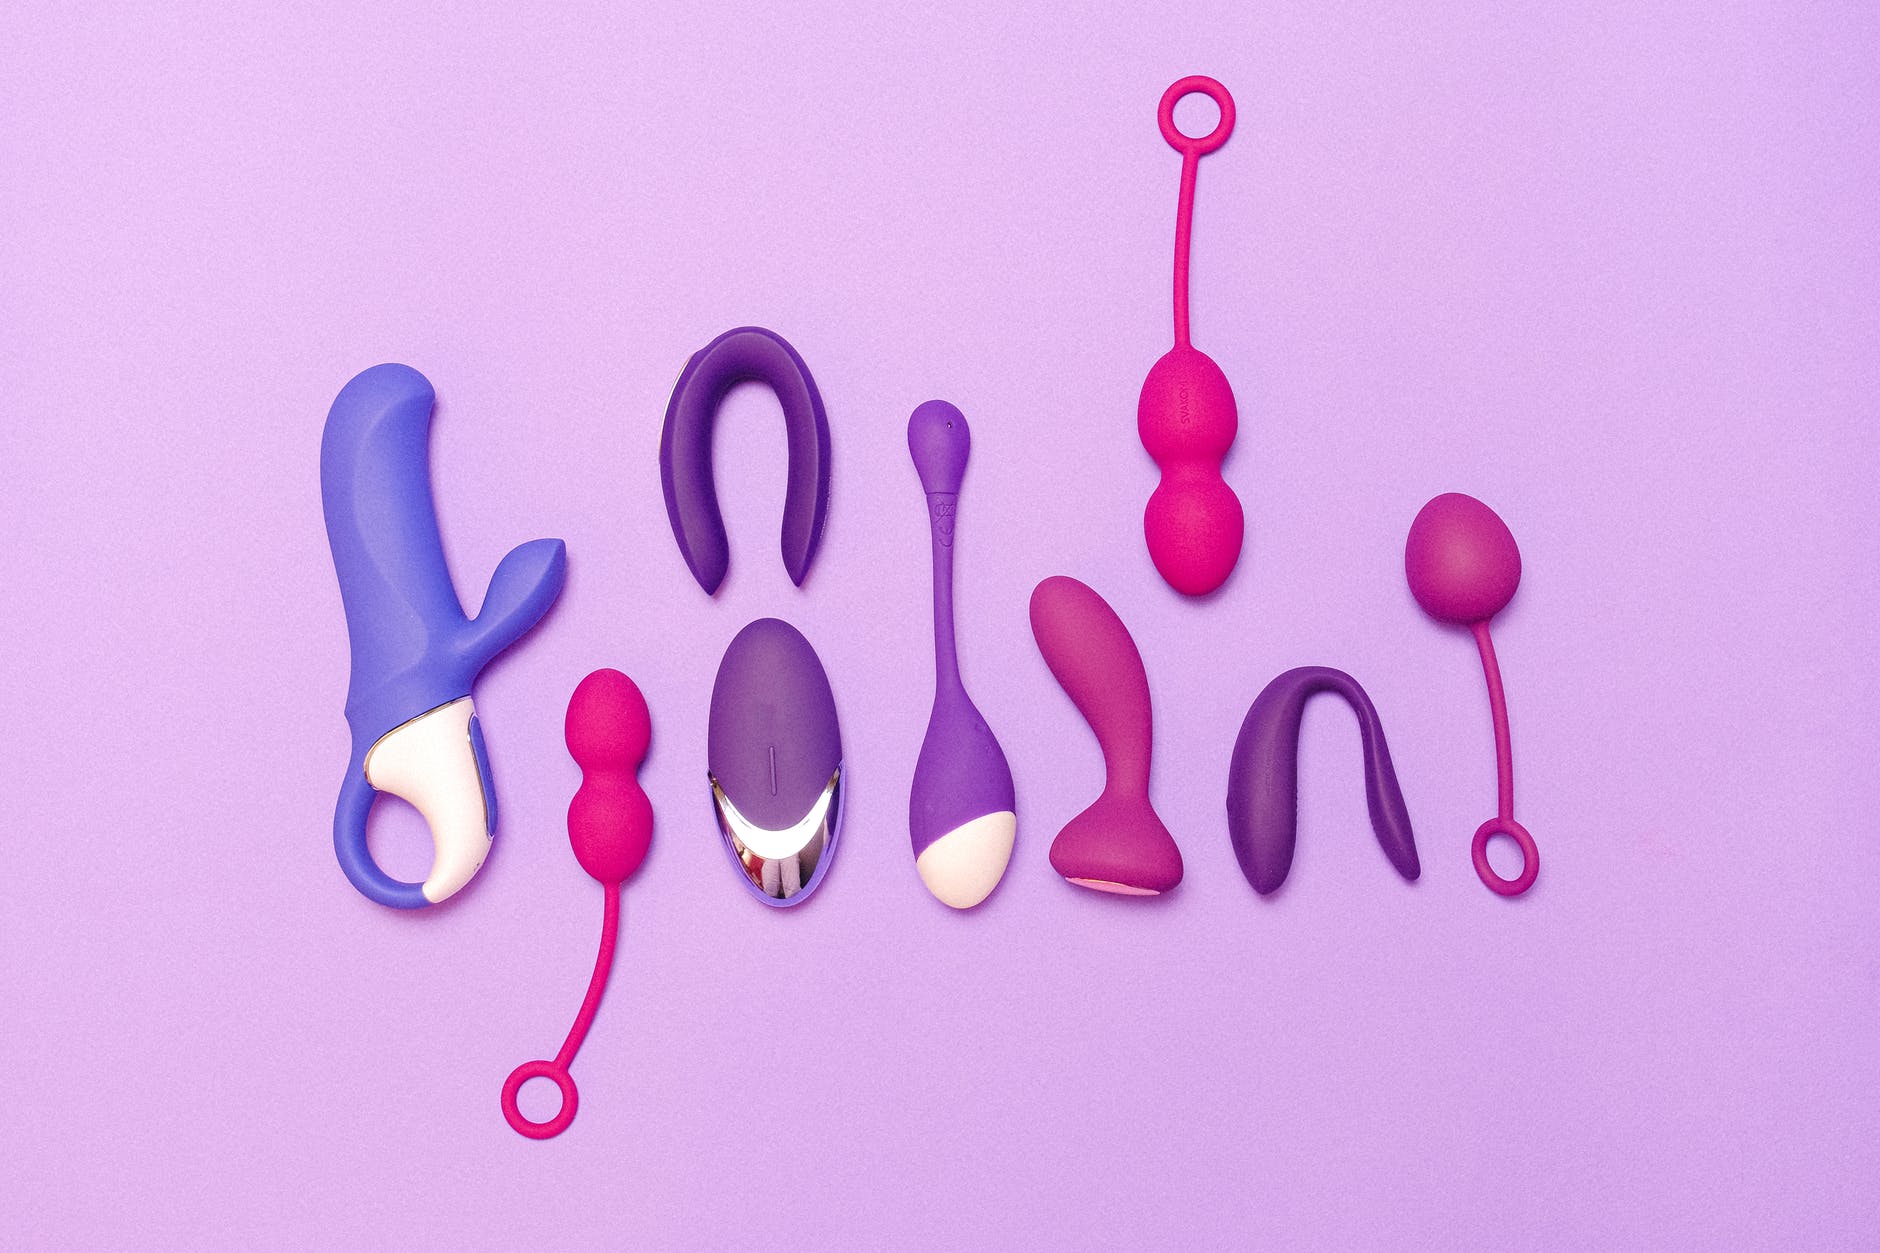 Sexual wellness - toys and products